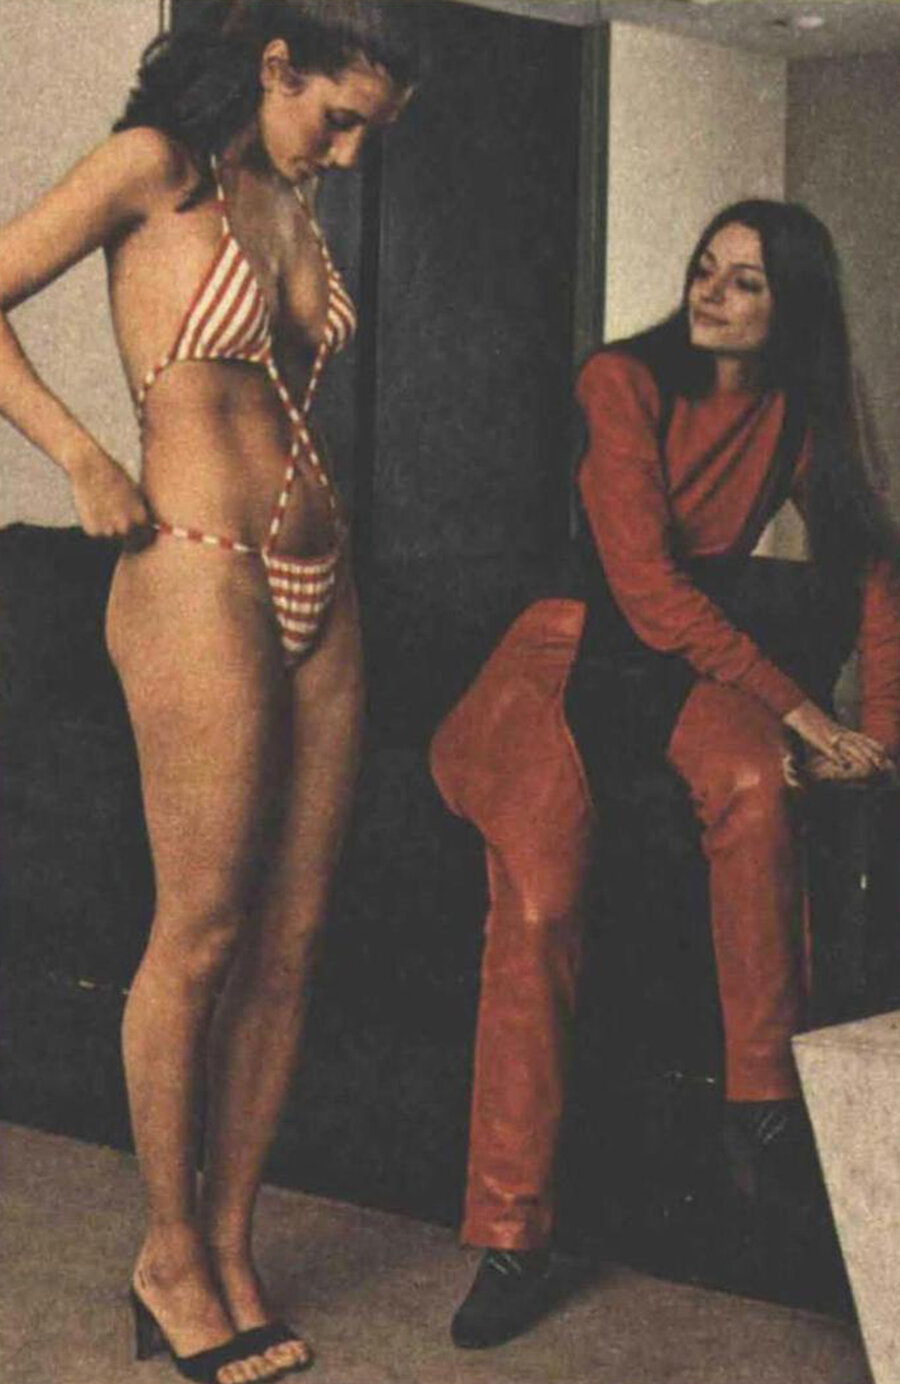 Kamali and one of her trademark swimsuits in Cosmopolitan, September 1979.